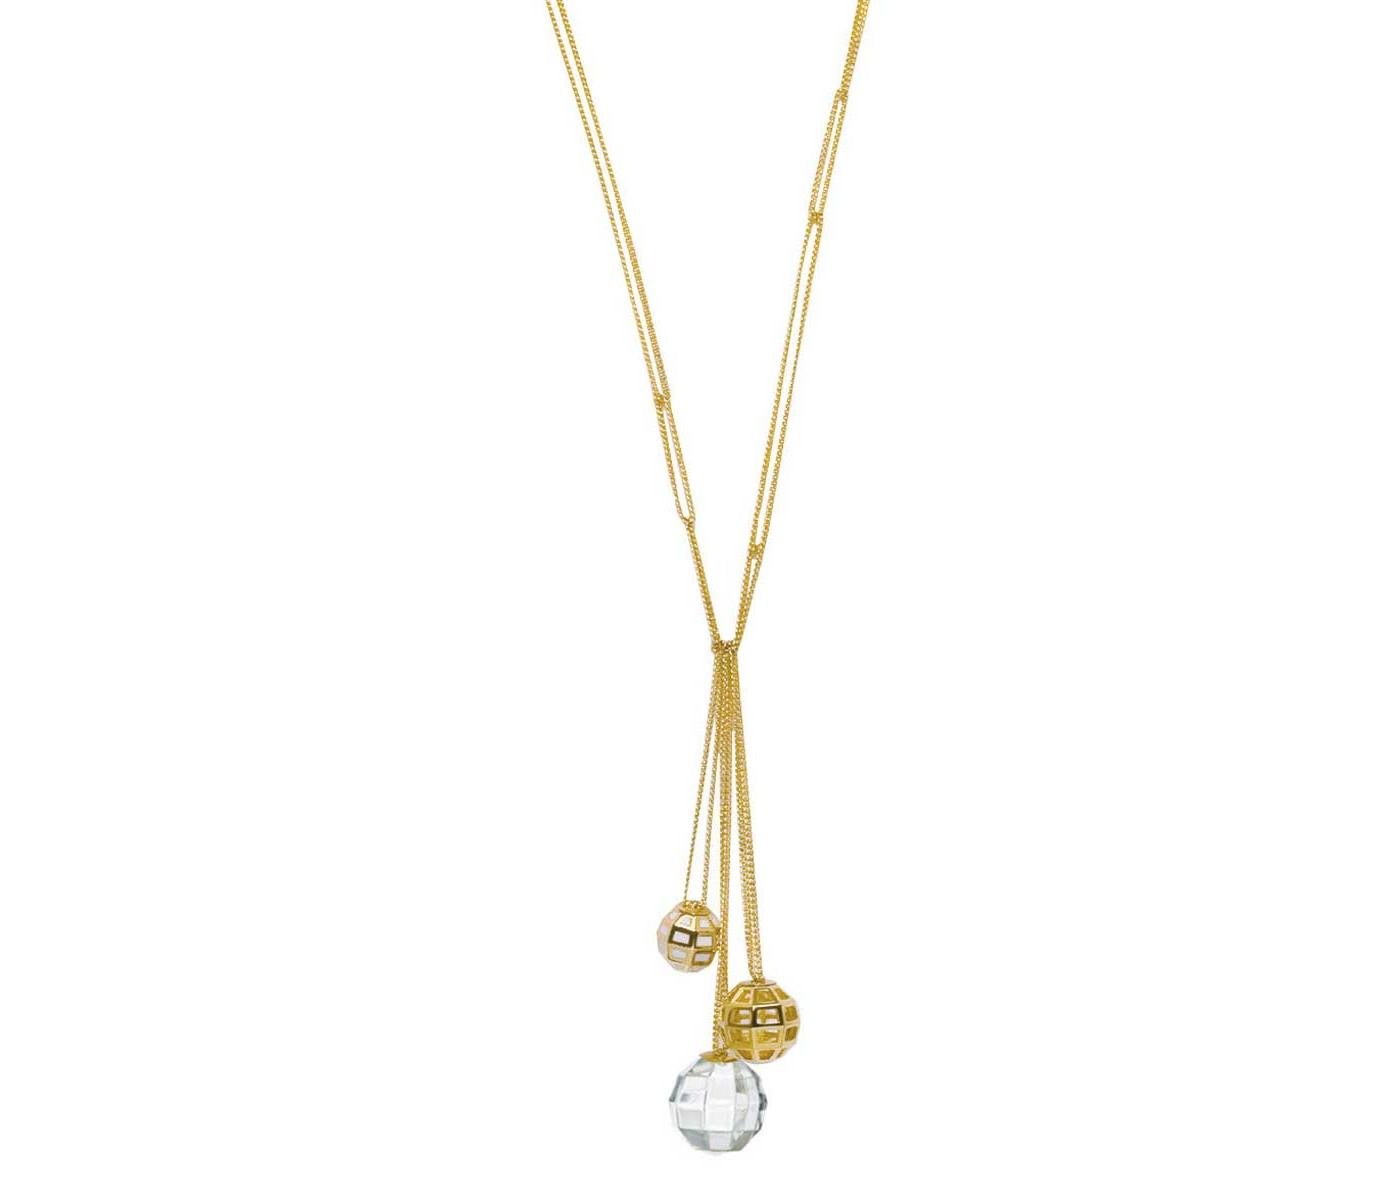 Necklace by Baccarat